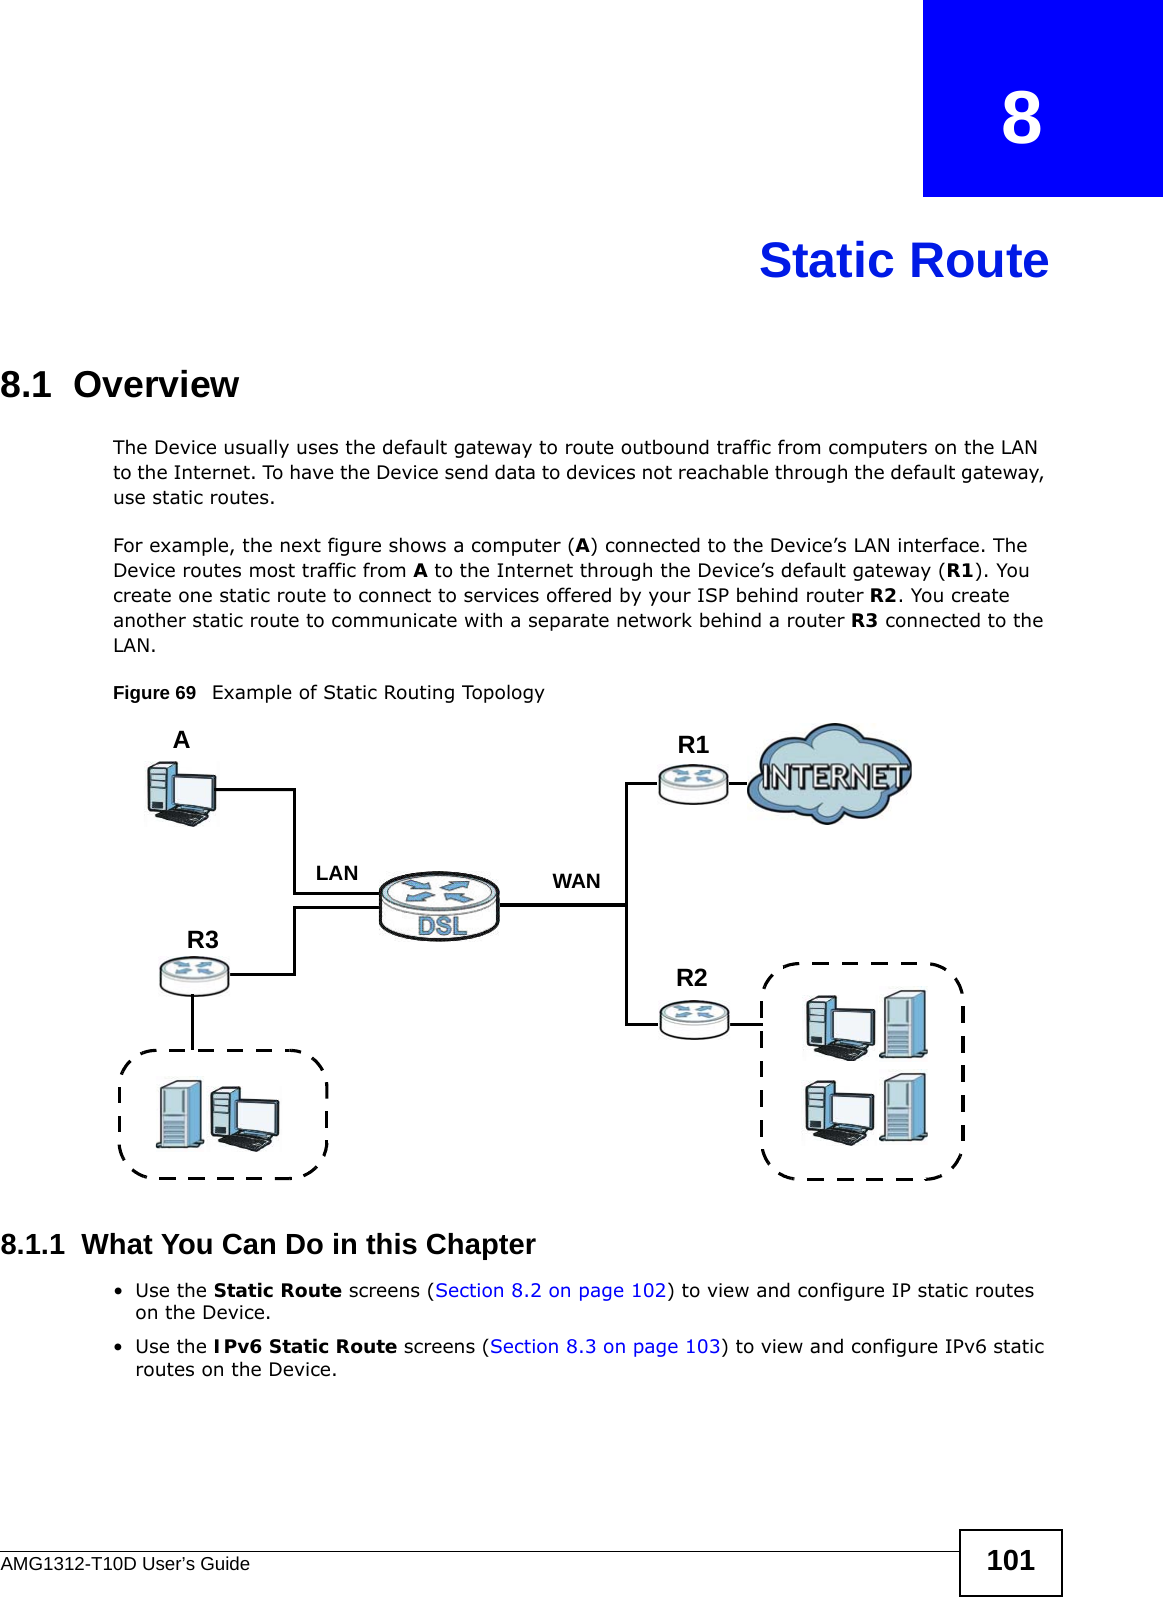 AMG1312-T10D User’s Guide 101CHAPTER   8Static Route8.1  Overview   The Device usually uses the default gateway to route outbound traffic from computers on the LAN to the Internet. To have the Device send data to devices not reachable through the default gateway, use static routes.For example, the next figure shows a computer (A) connected to the Device’s LAN interface. The Device routes most traffic from A to the Internet through the Device’s default gateway (R1). You create one static route to connect to services offered by your ISP behind router R2. You create another static route to communicate with a separate network behind a router R3 connected to the LAN. Figure 69   Example of Static Routing Topology8.1.1  What You Can Do in this Chapter•Use the Static Route screens (Section 8.2 on page 102) to view and configure IP static routes on the Device.•Use the IPv6 Static Route screens (Section 8.3 on page 103) to view and configure IPv6 static routes on the Device.WANR1R2AR3LAN